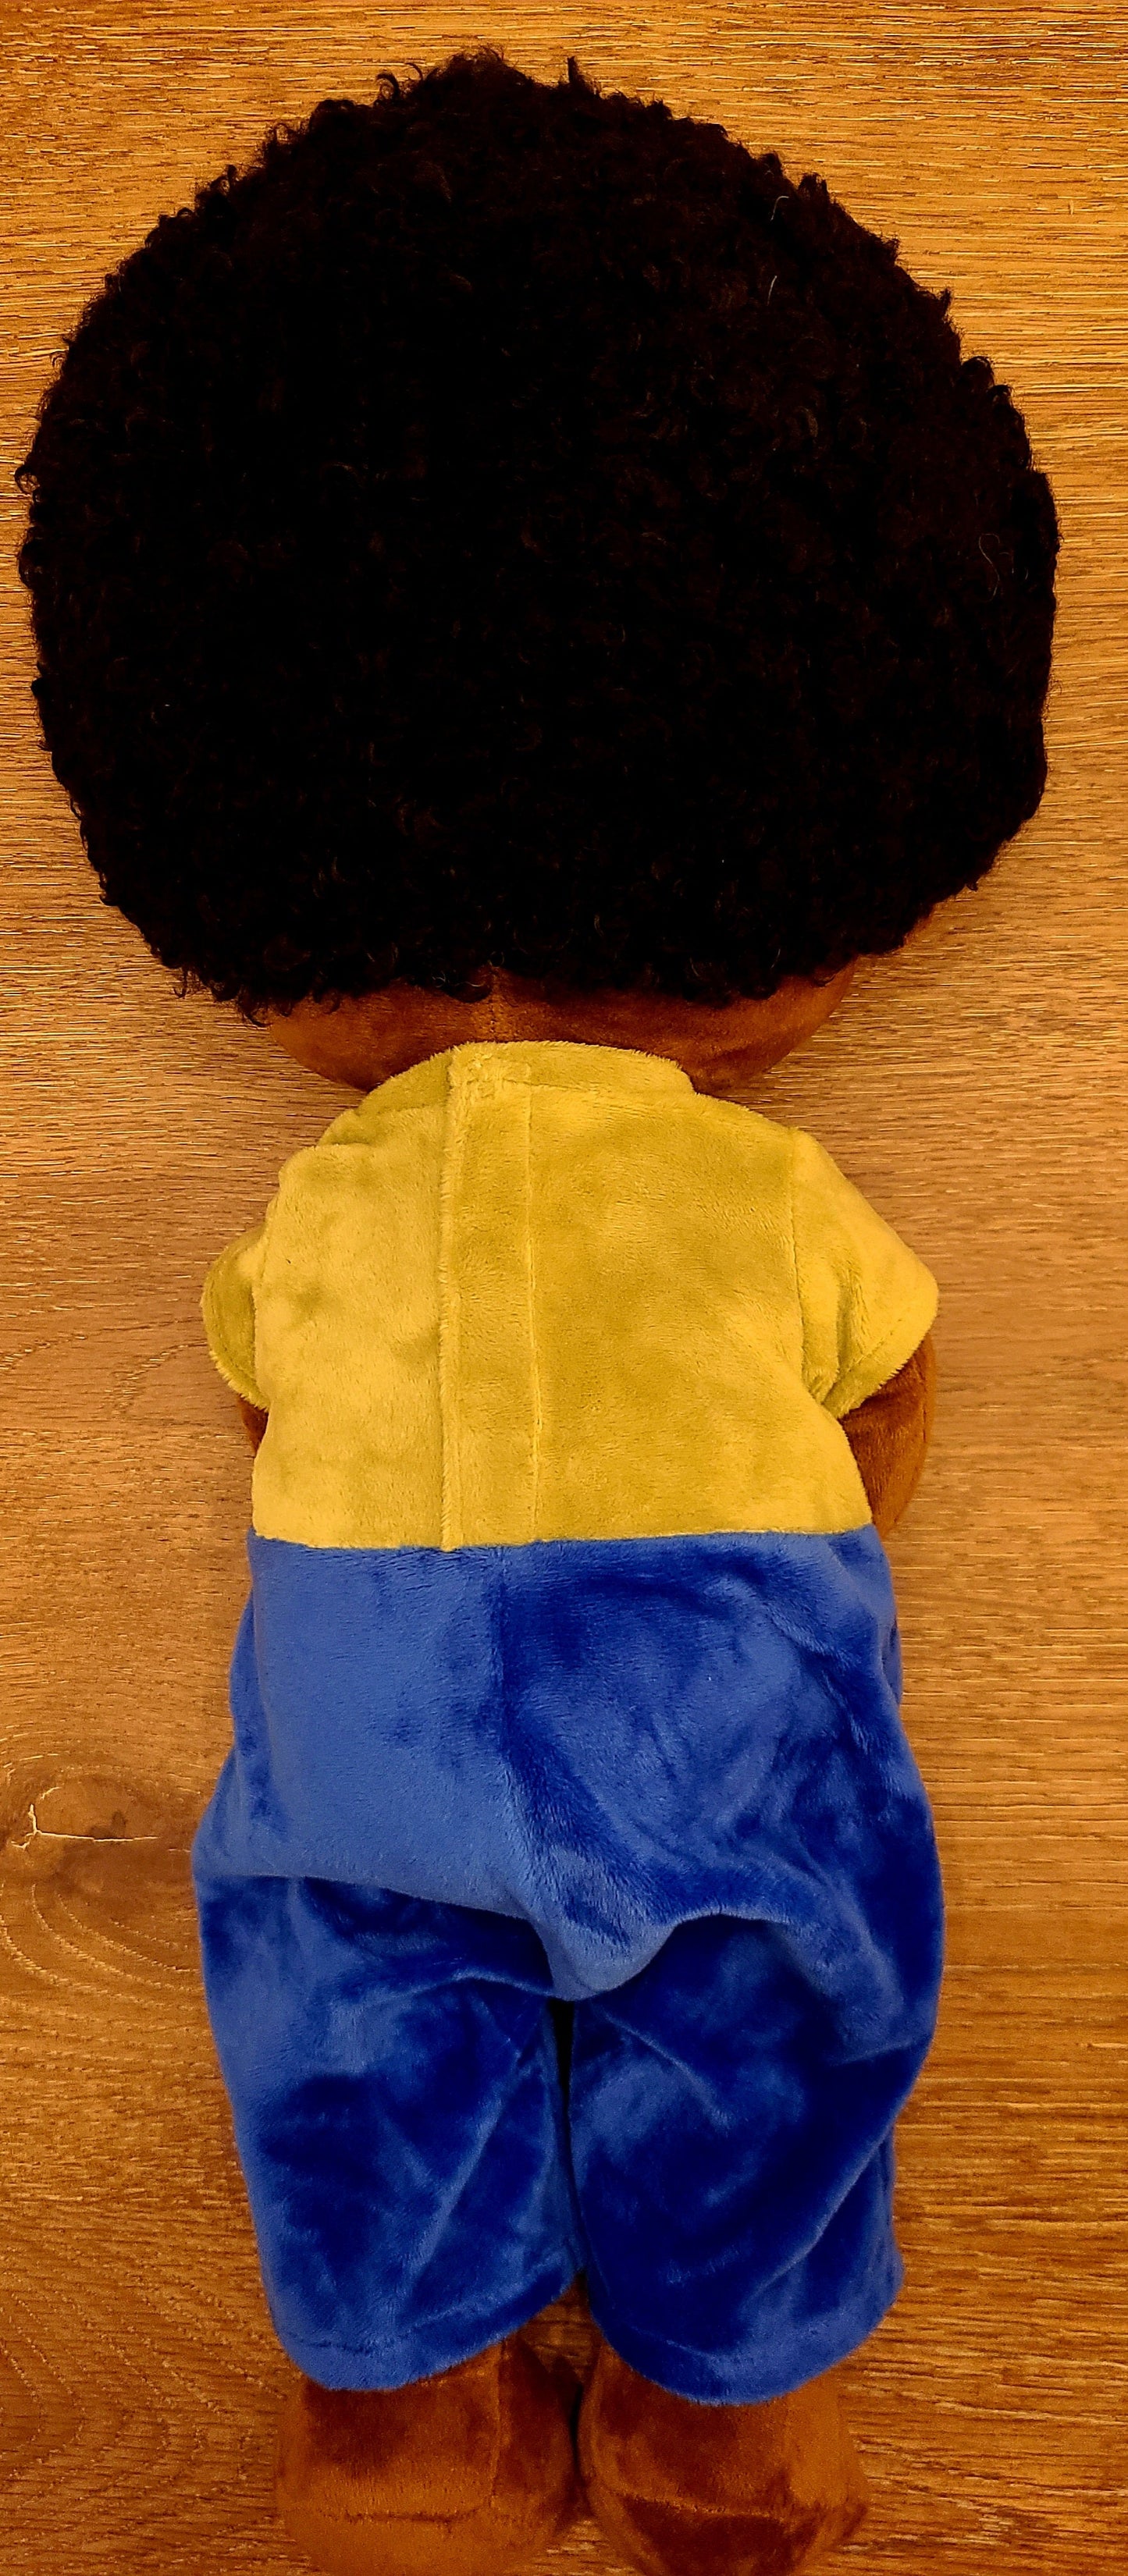 Personalized Soft Rag 19in Brown skin Baby Boy Plush Doll Toy/Handmade Baby Gift Toy